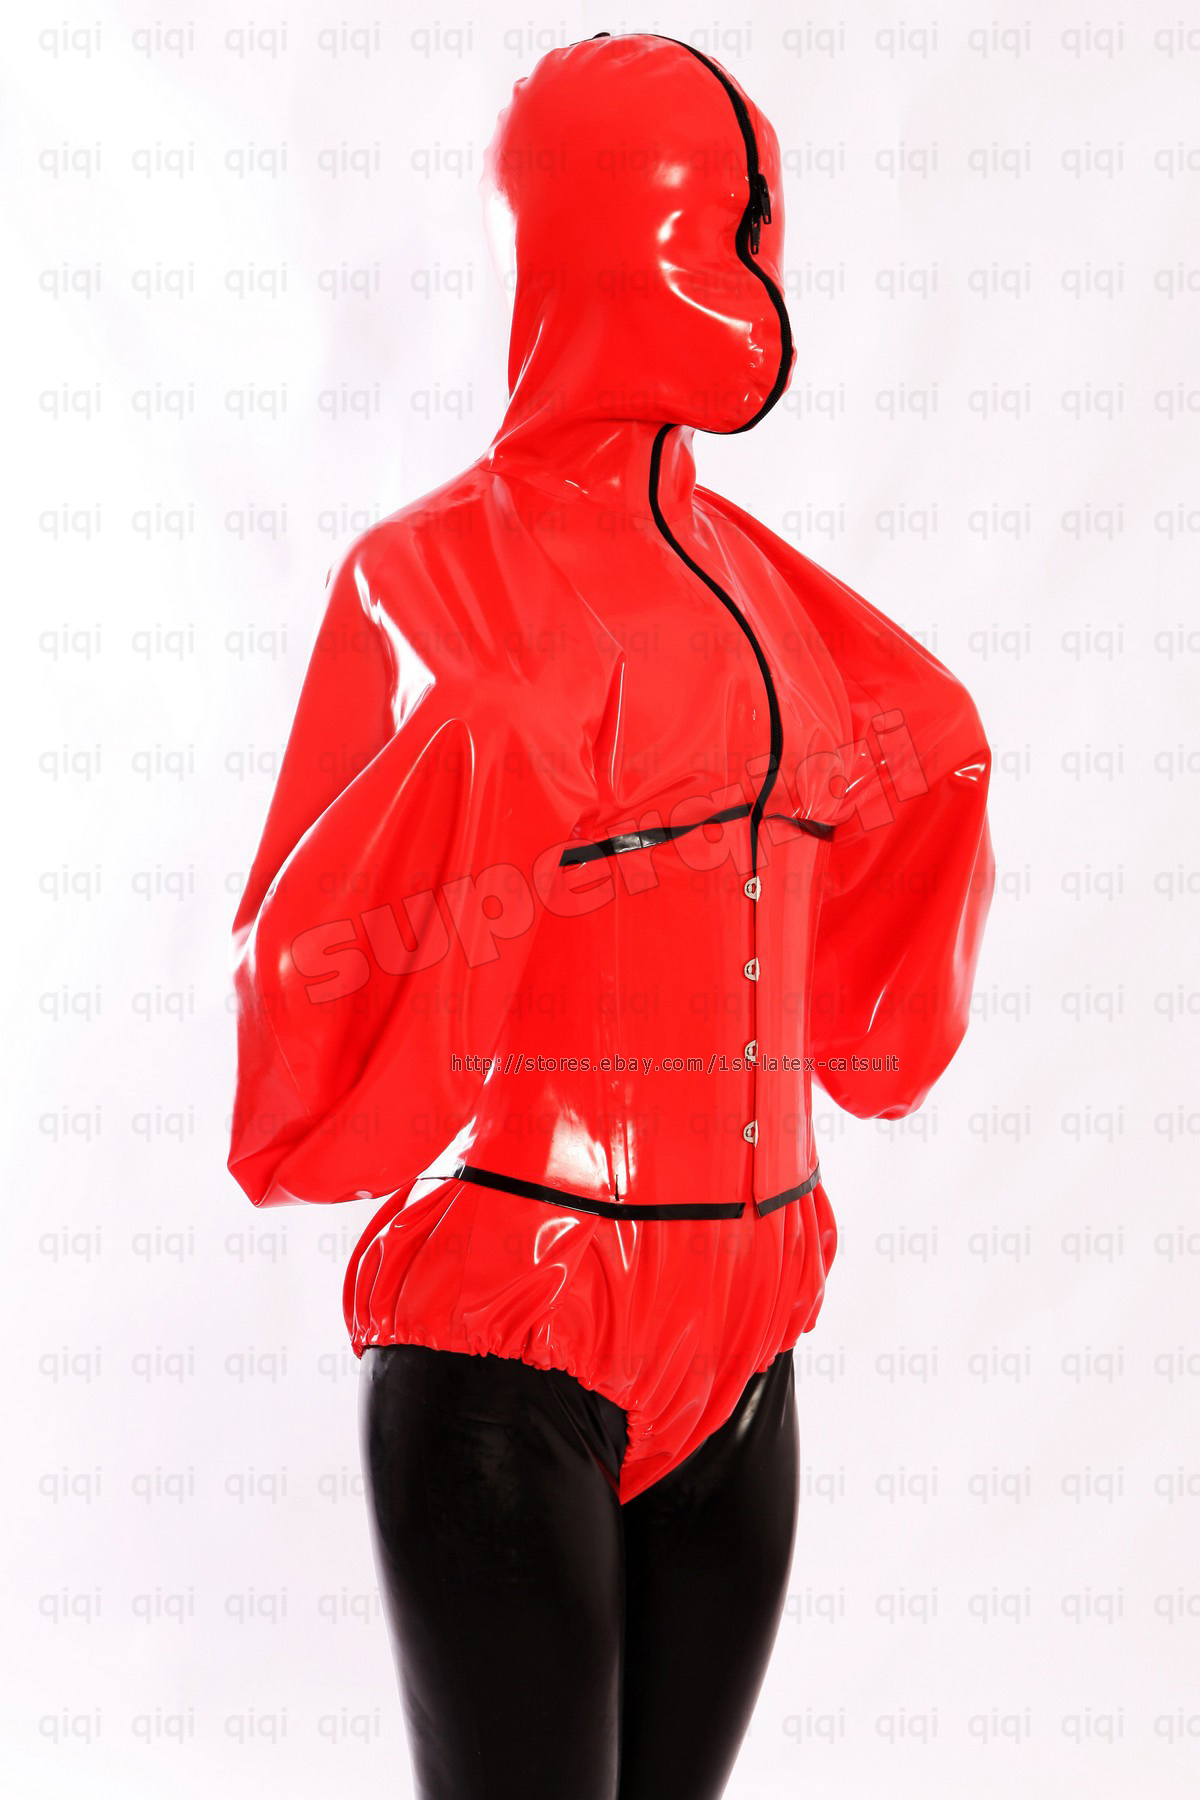 Latexrubber8mm Leotard Hoody Hood Corset Bodysuit Catsuit Swimsuit Outfit Red Ebay 2325